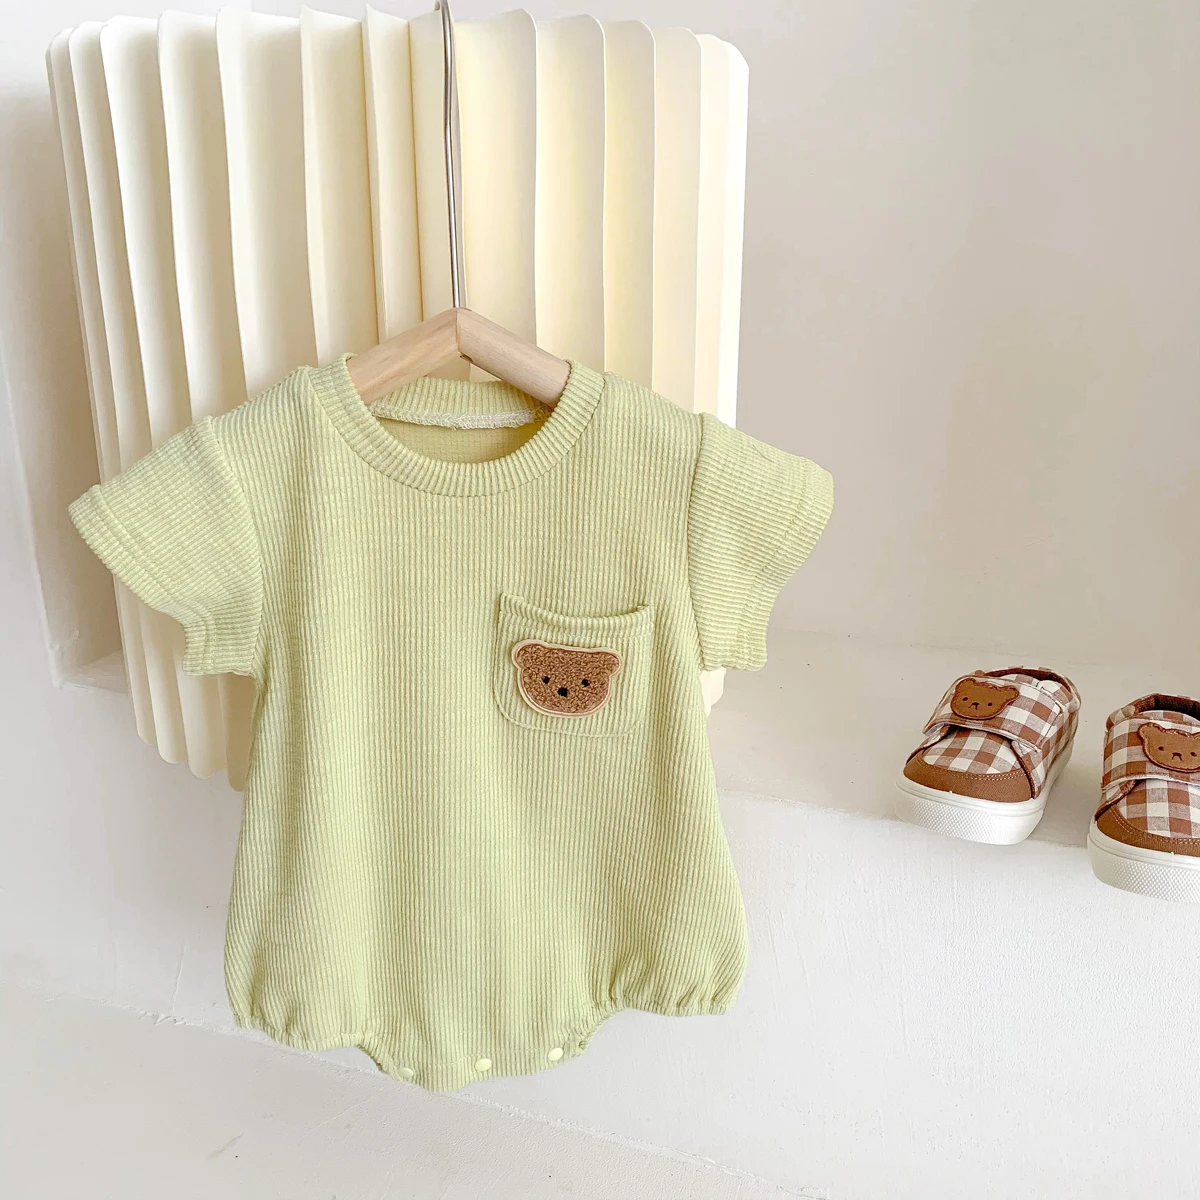 Summer Baby Clothes: Newborn Boy Romper with Bear Embroidery and Pockets